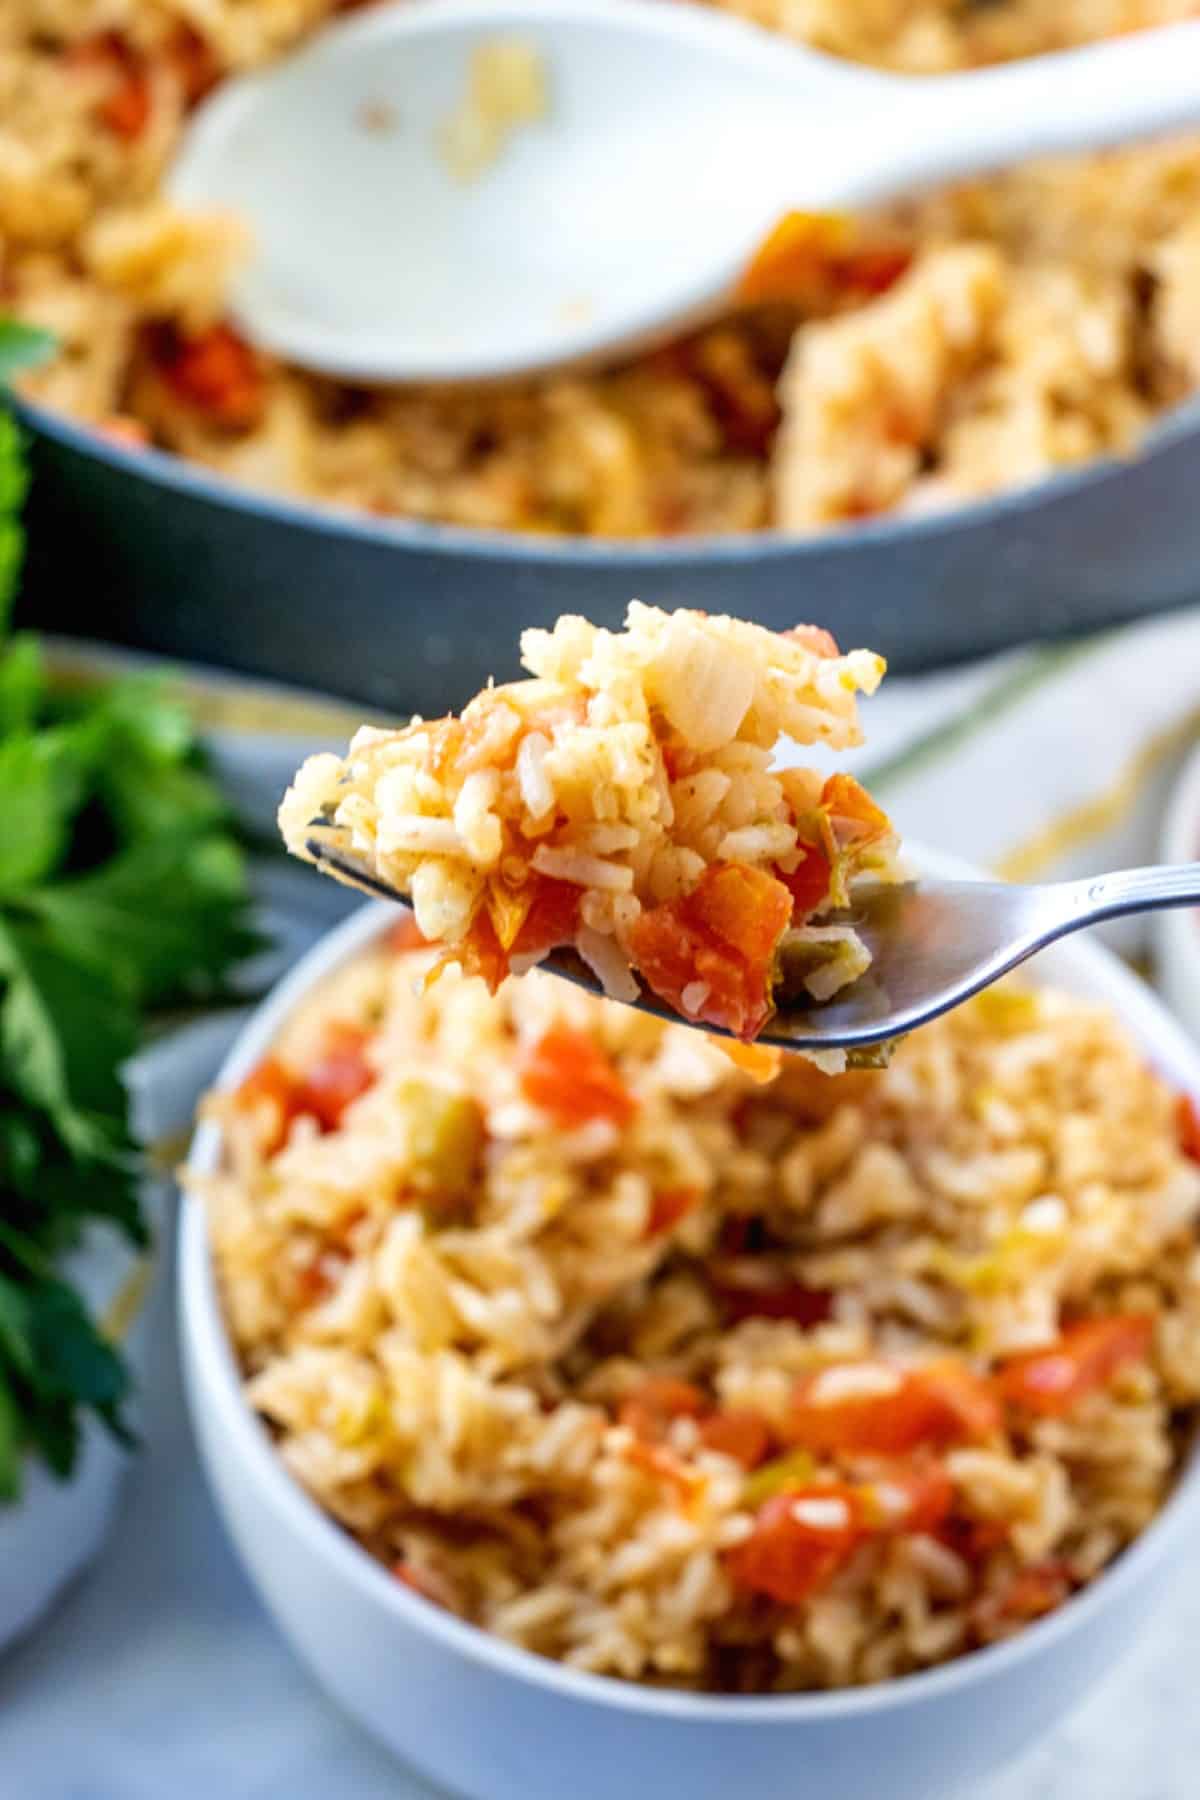 Spanish rice is in a white bowl with a hank poking in a fork and pulling up a bite towards the camera lens. The partially full skillet is behind.